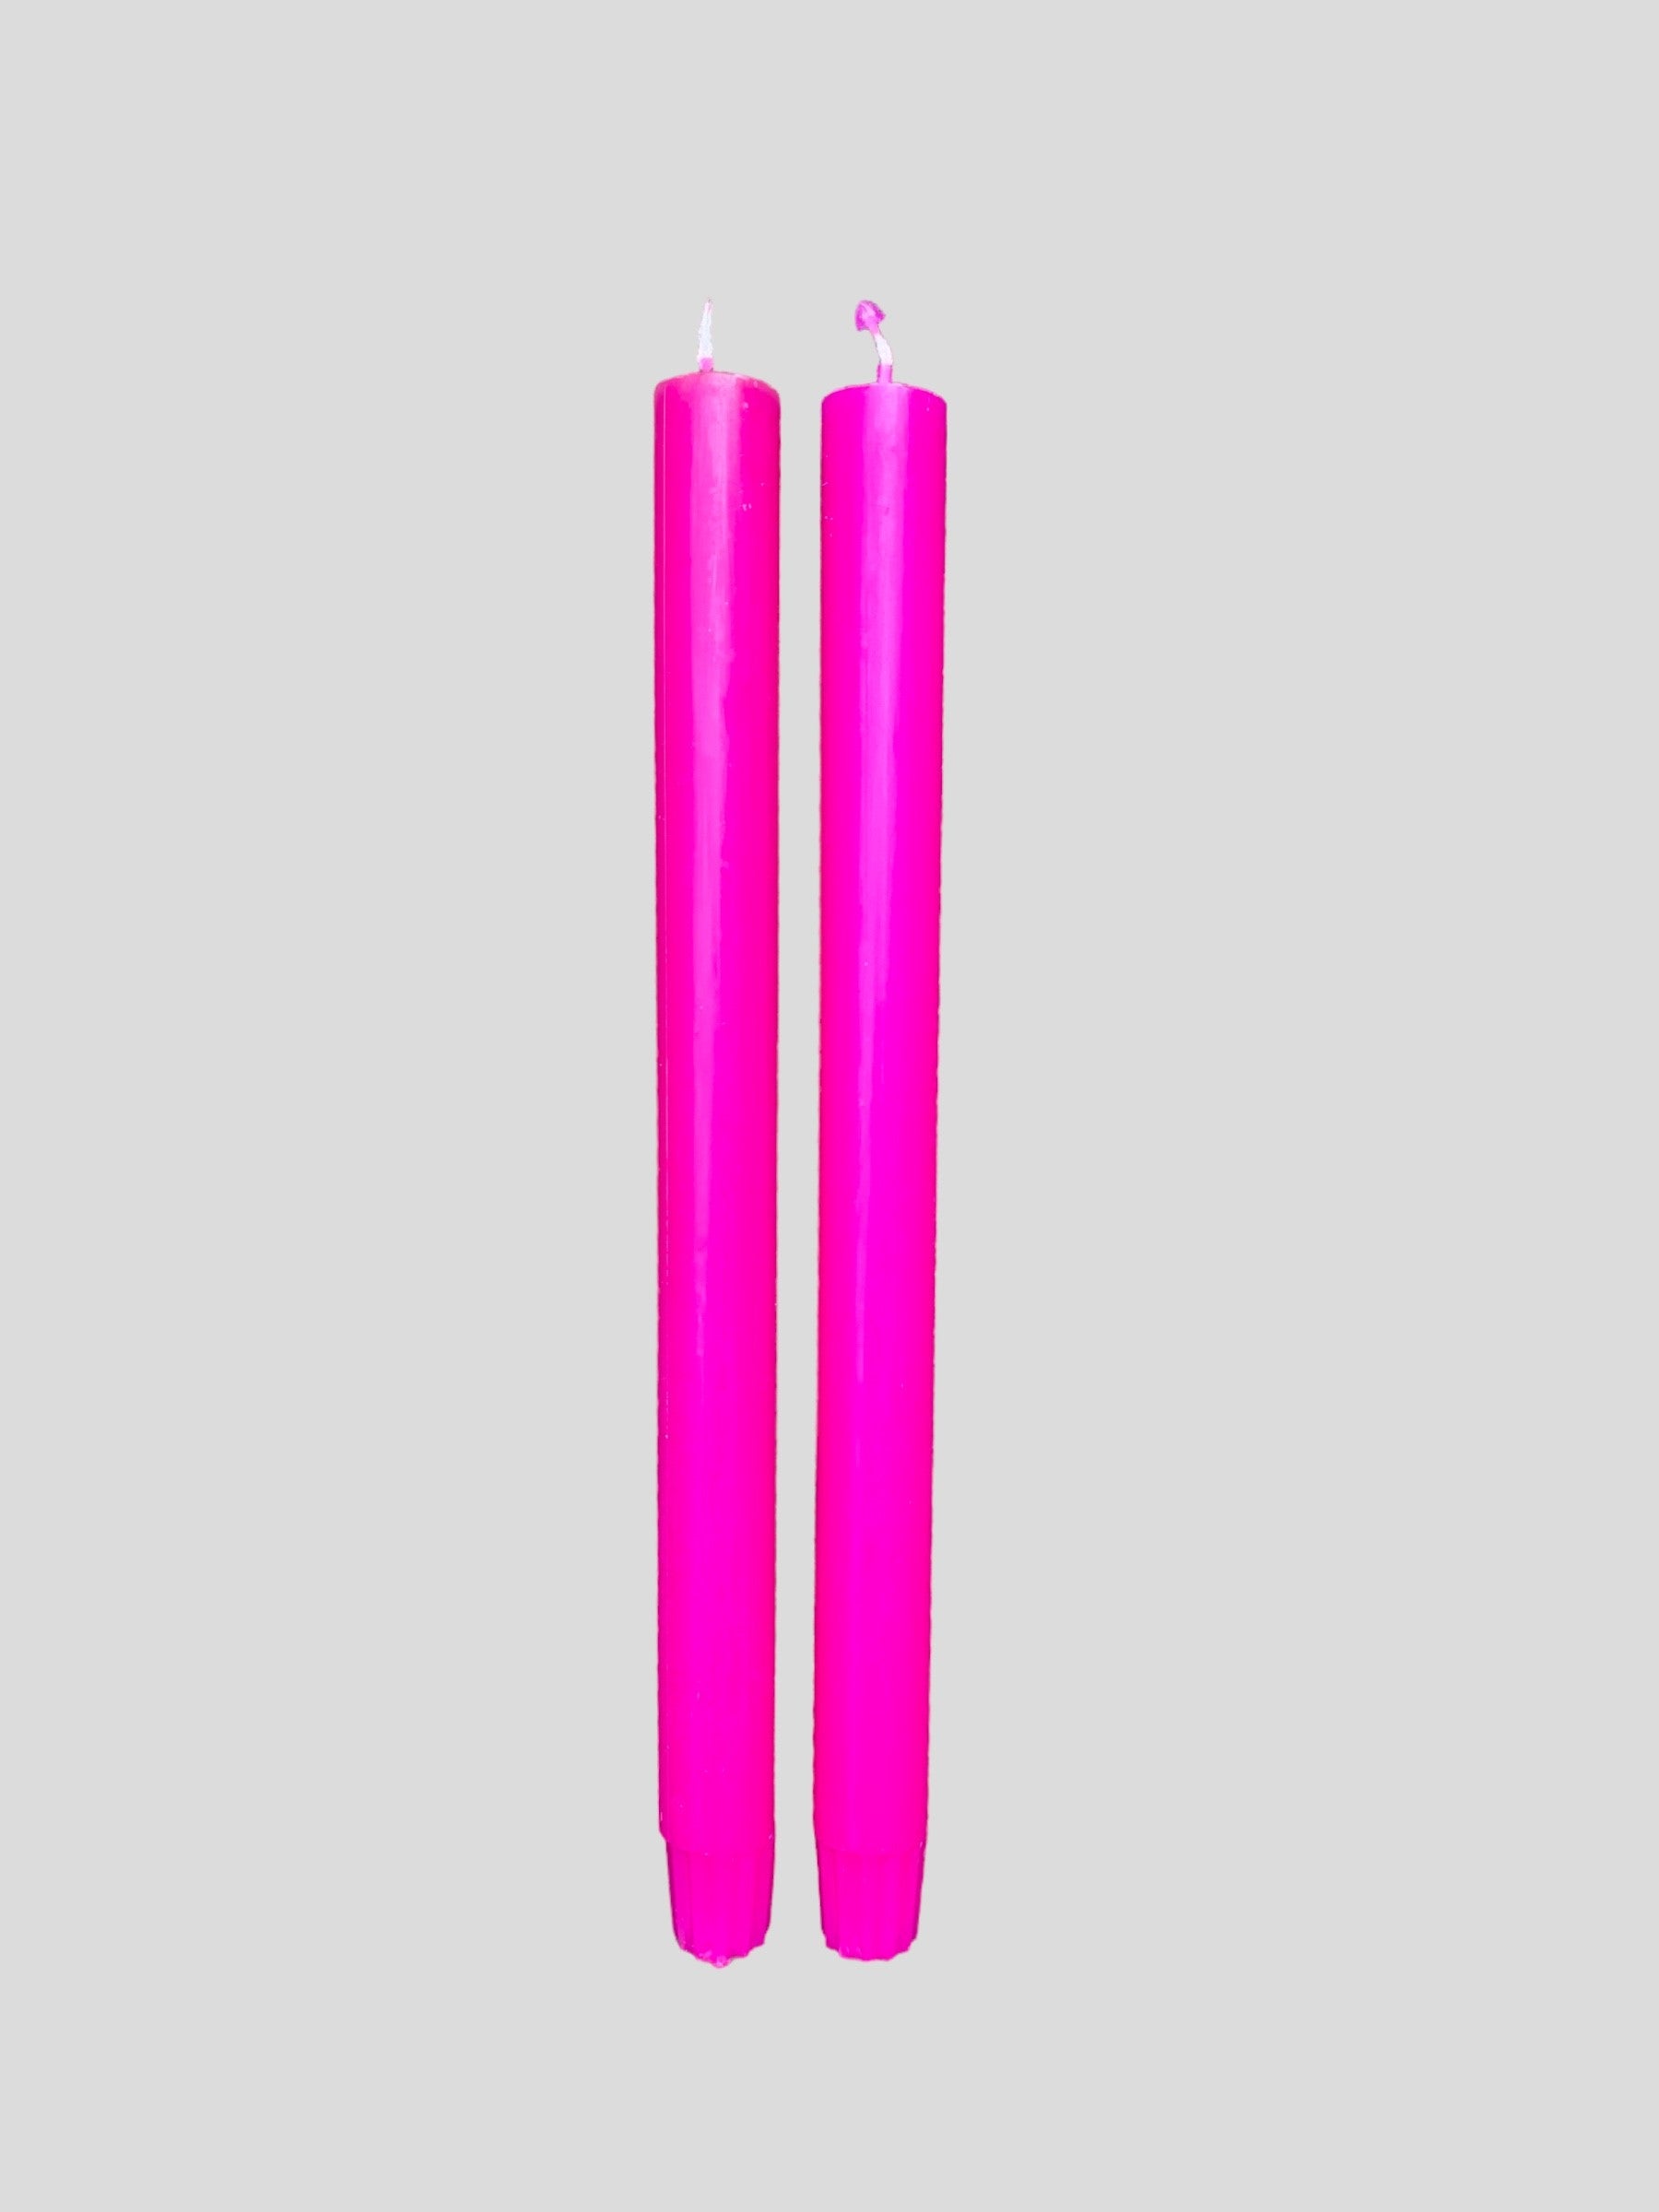 A pair of fluorescent purple candles from True Grace